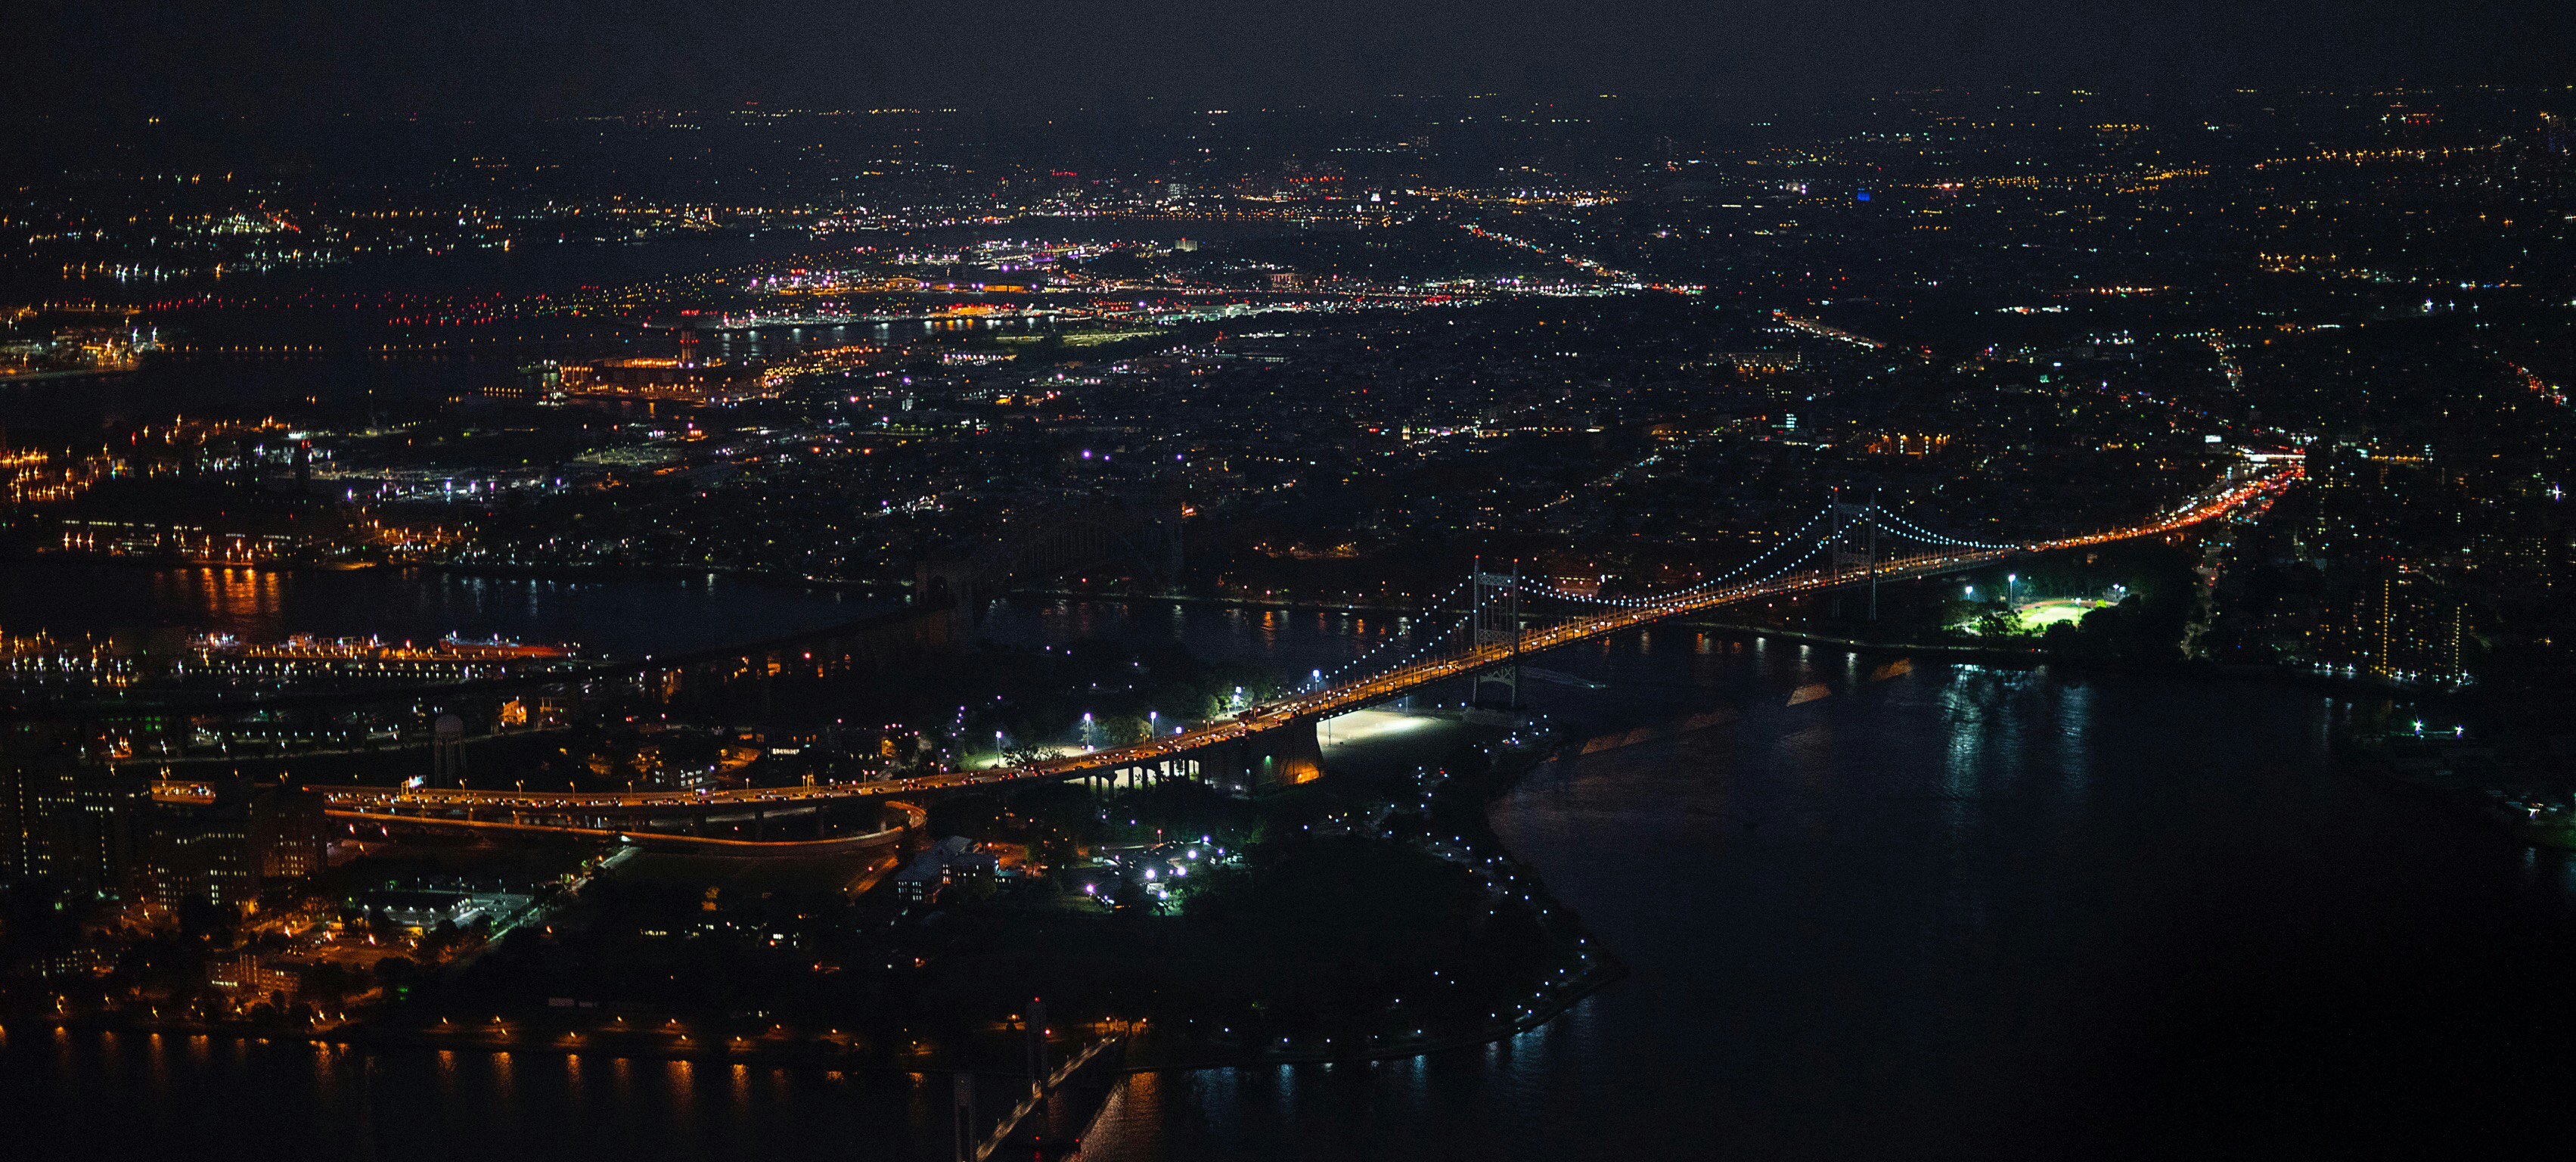 bird's eye view photo of cityscape during nighttime